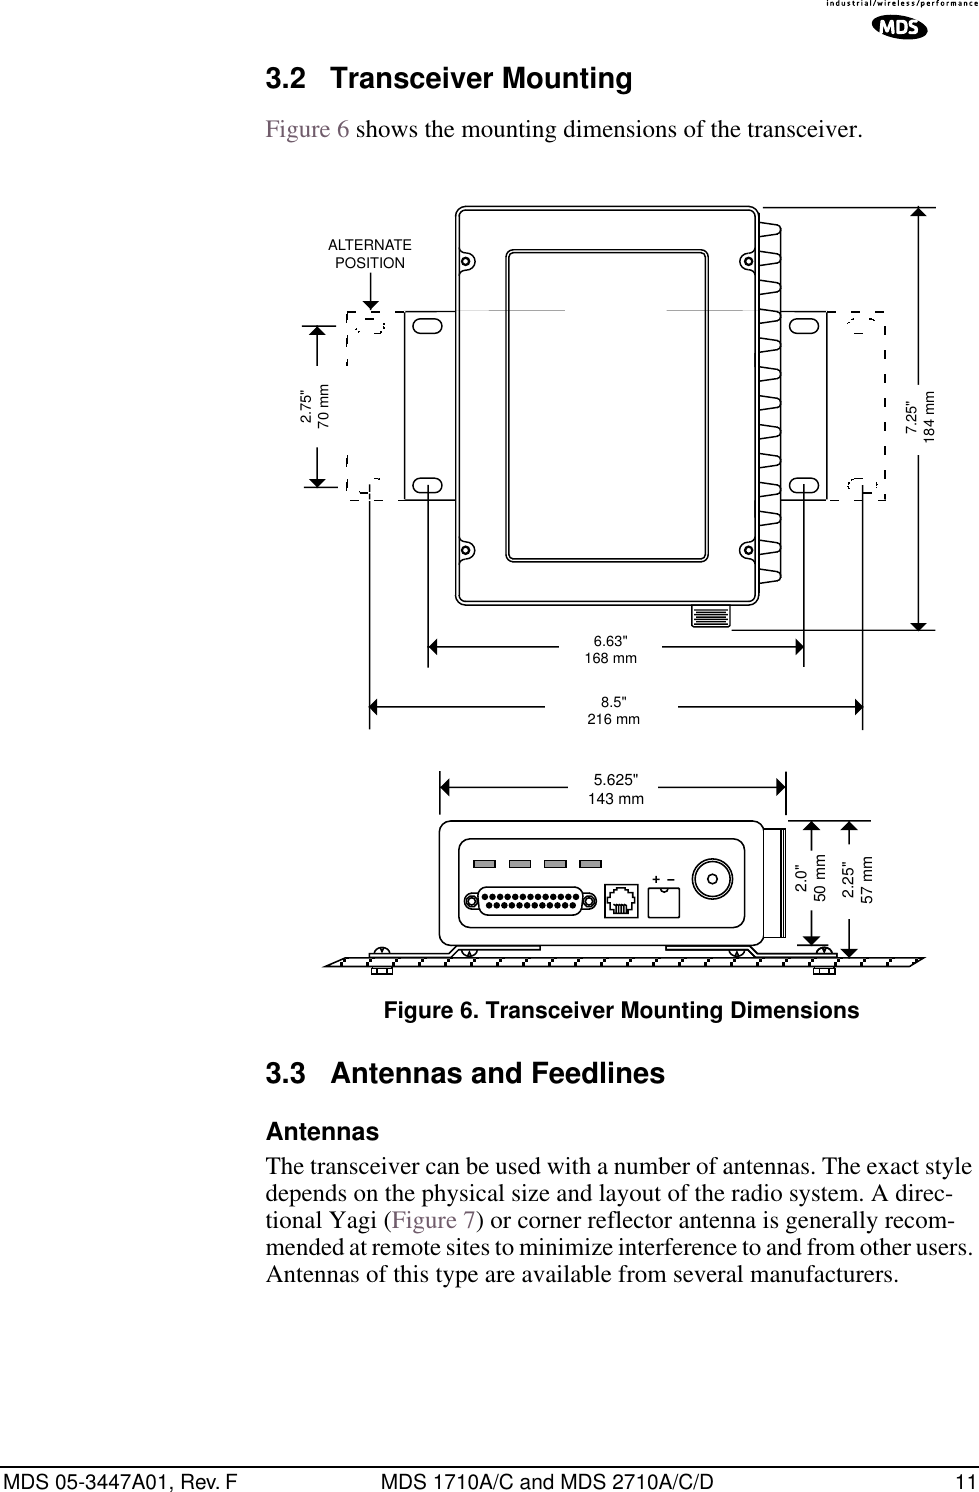 MDS 05-3447A01, Rev. F MDS 1710A/C and MDS 2710A/C/D 113.2 Transceiver MountingFigure 6 shows the mounting dimensions of the transceiver.Invisible place holderFigure 6. Transceiver Mounting Dimensions3.3 Antennas and FeedlinesAntennasThe transceiver can be used with a number of antennas. The exact style depends on the physical size and layout of the radio system. A direc-tional Yagi (Figure 7) or corner reflector antenna is generally recom-mended at remote sites to minimize interference to and from other users. Antennas of this type are available from several manufacturers.8.5&quot;216 mm1.75&quot;4.44 CM6.63&quot;168 mm2.75&quot;70 mm7.25&quot;184 mmALTERNATEPOSITION5.625&quot;143 mm2.25&quot;57 mm2.0&quot;50 mm